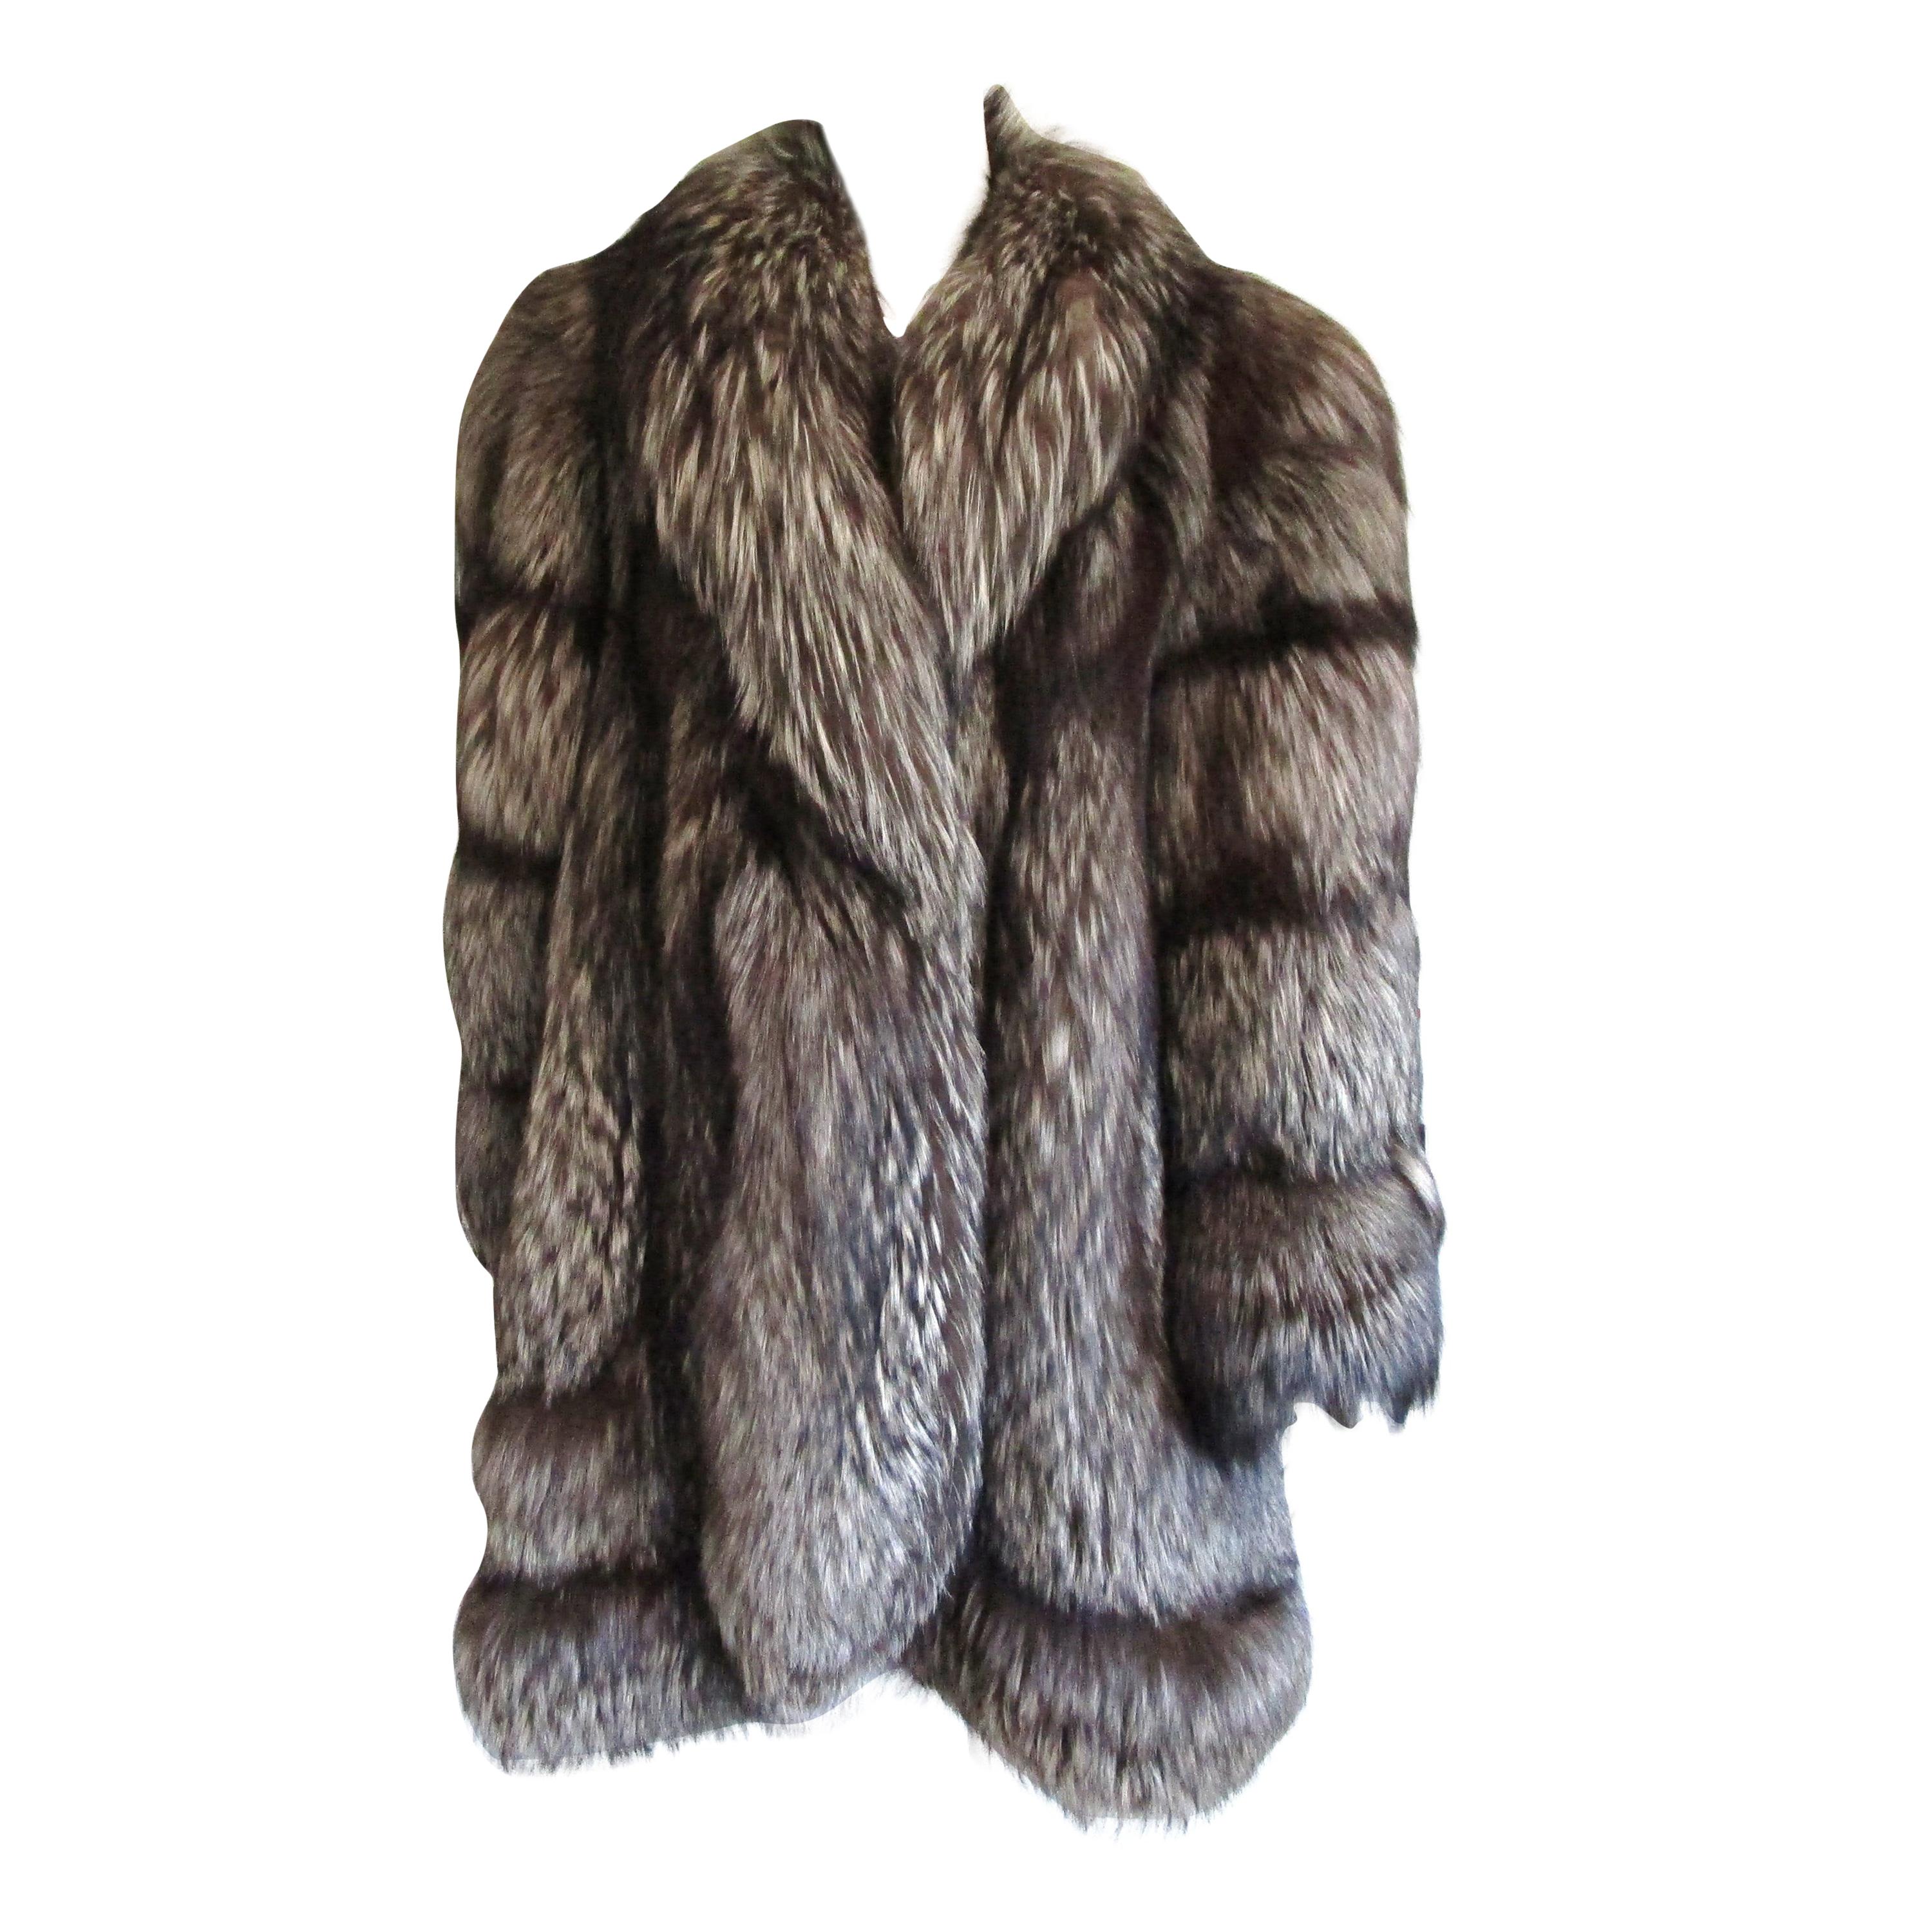  Fox Swing Coat Over sized Large Unisex - Silver Tipped 14-16 Scalloped Detail For Sale